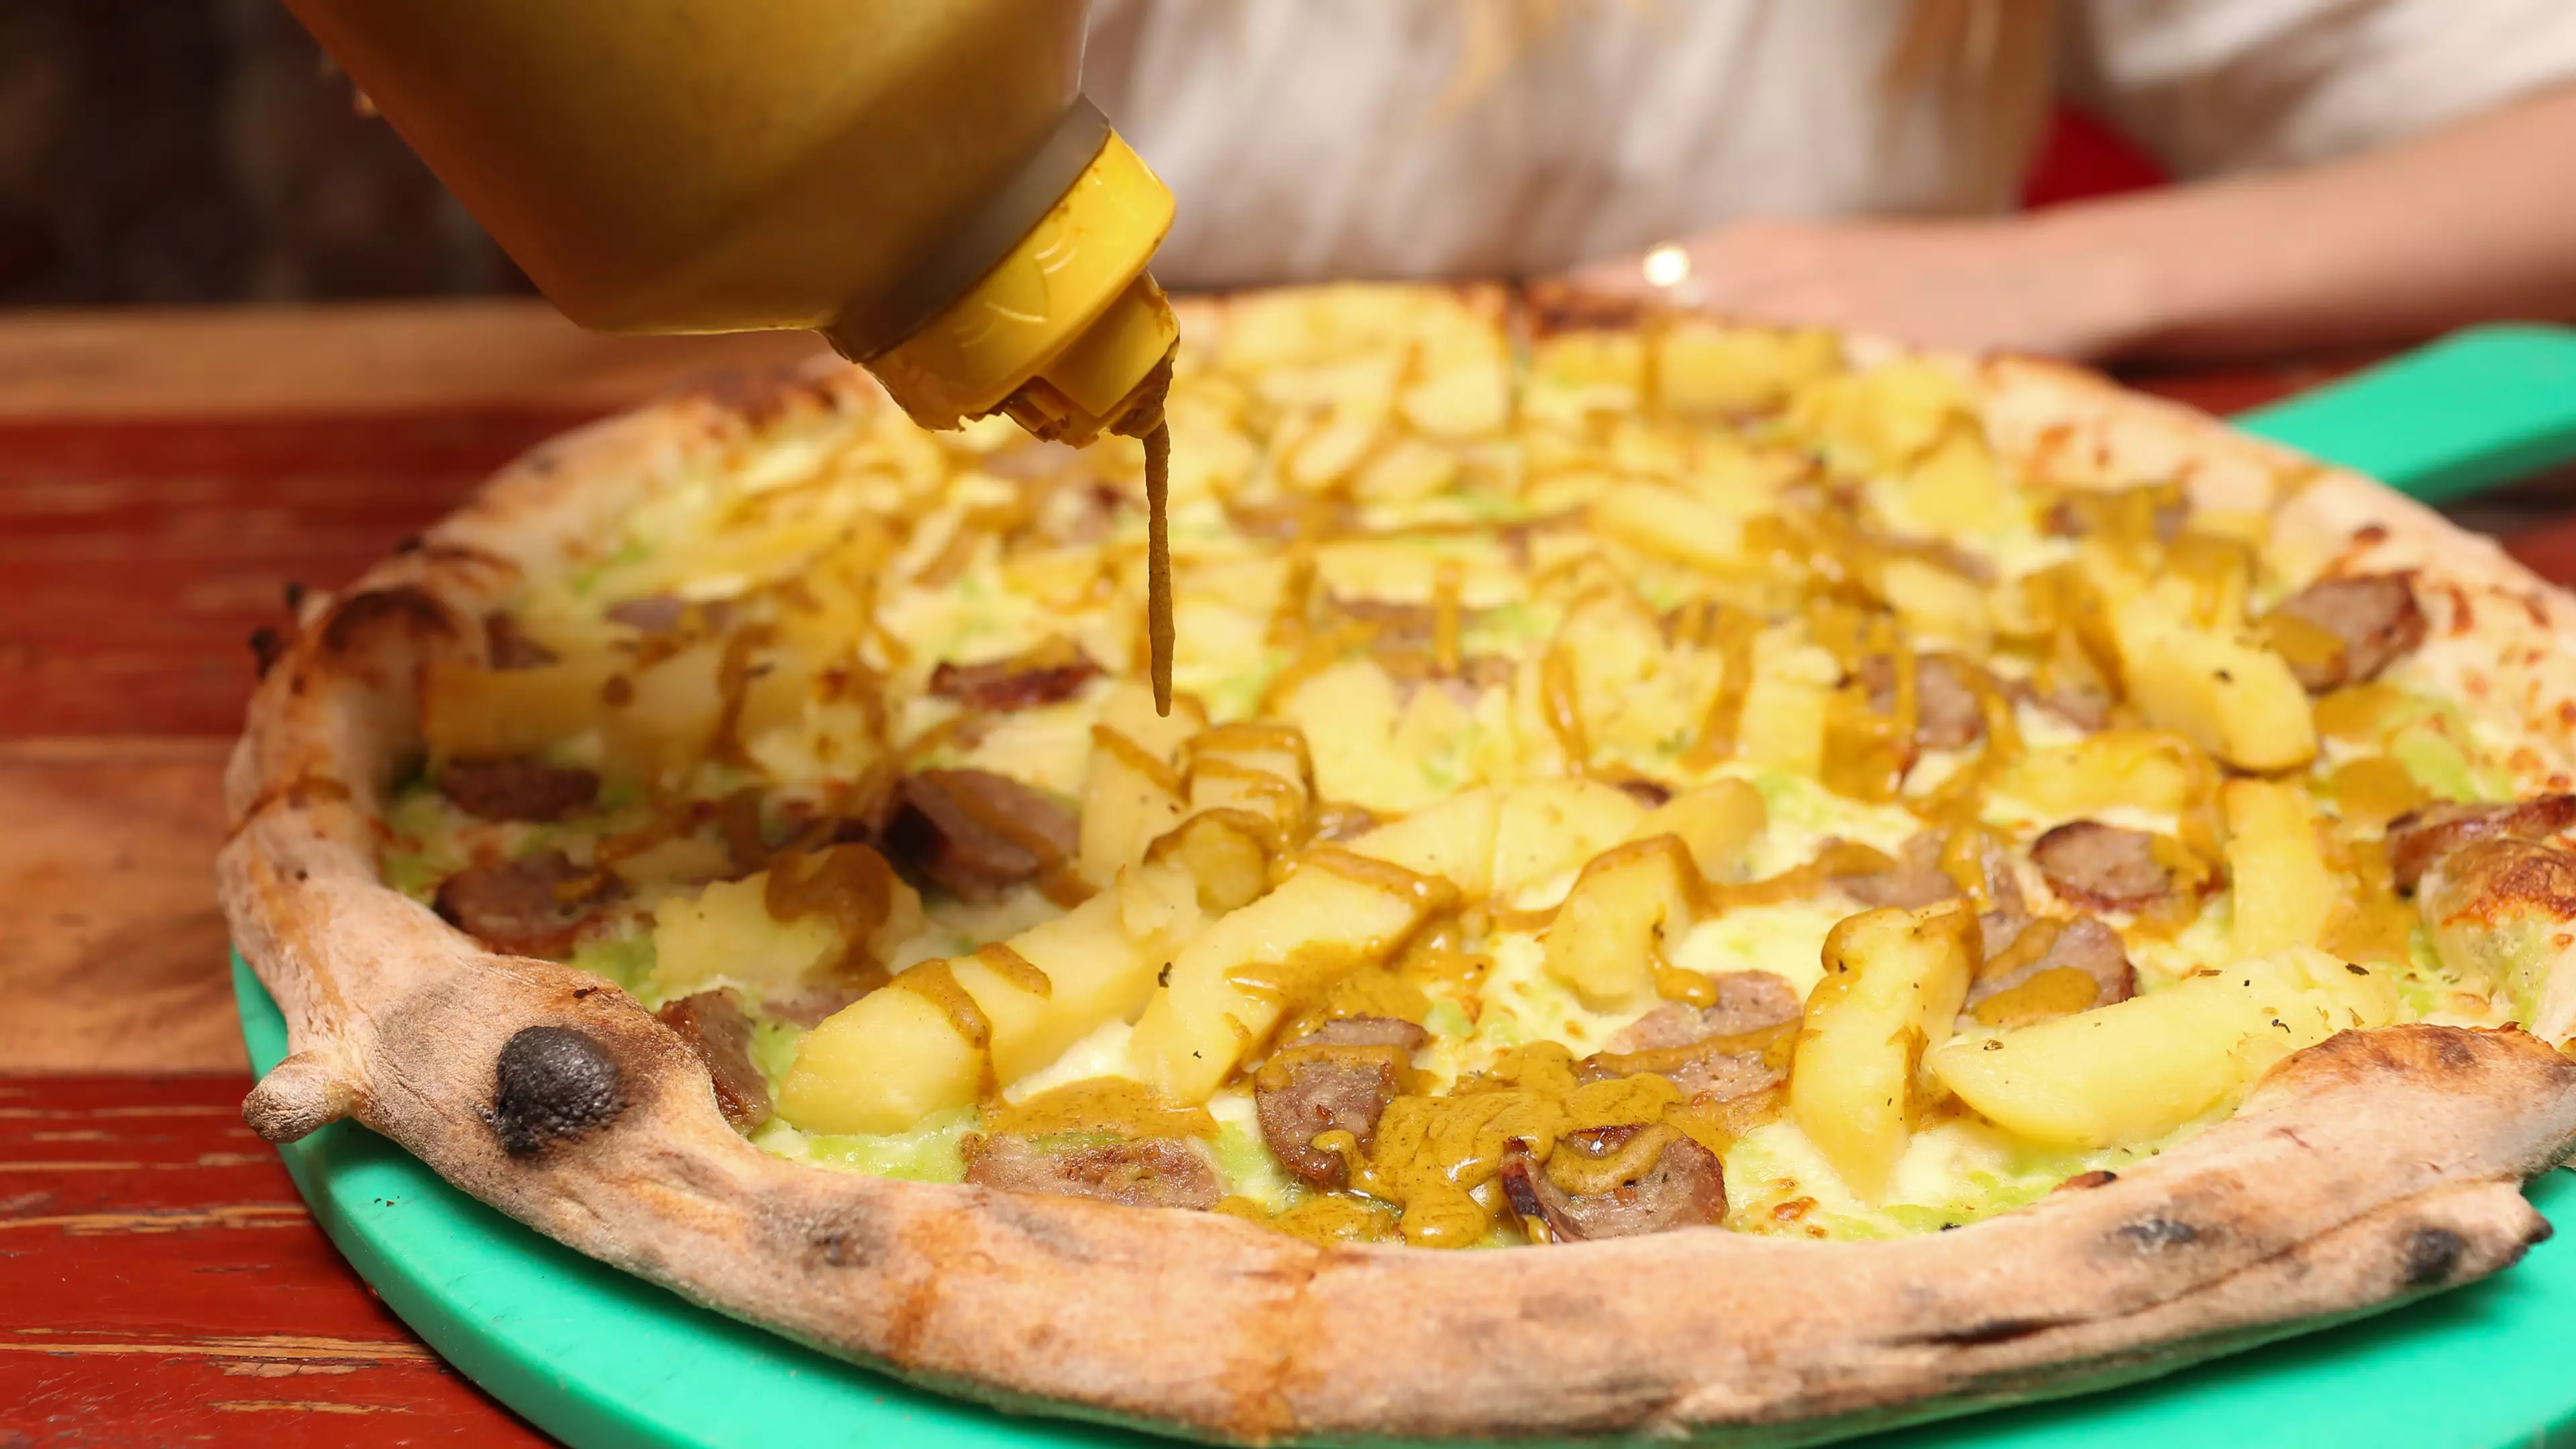 Chippy Tea Pizzas Are Here To Make All Your Dreams Come True